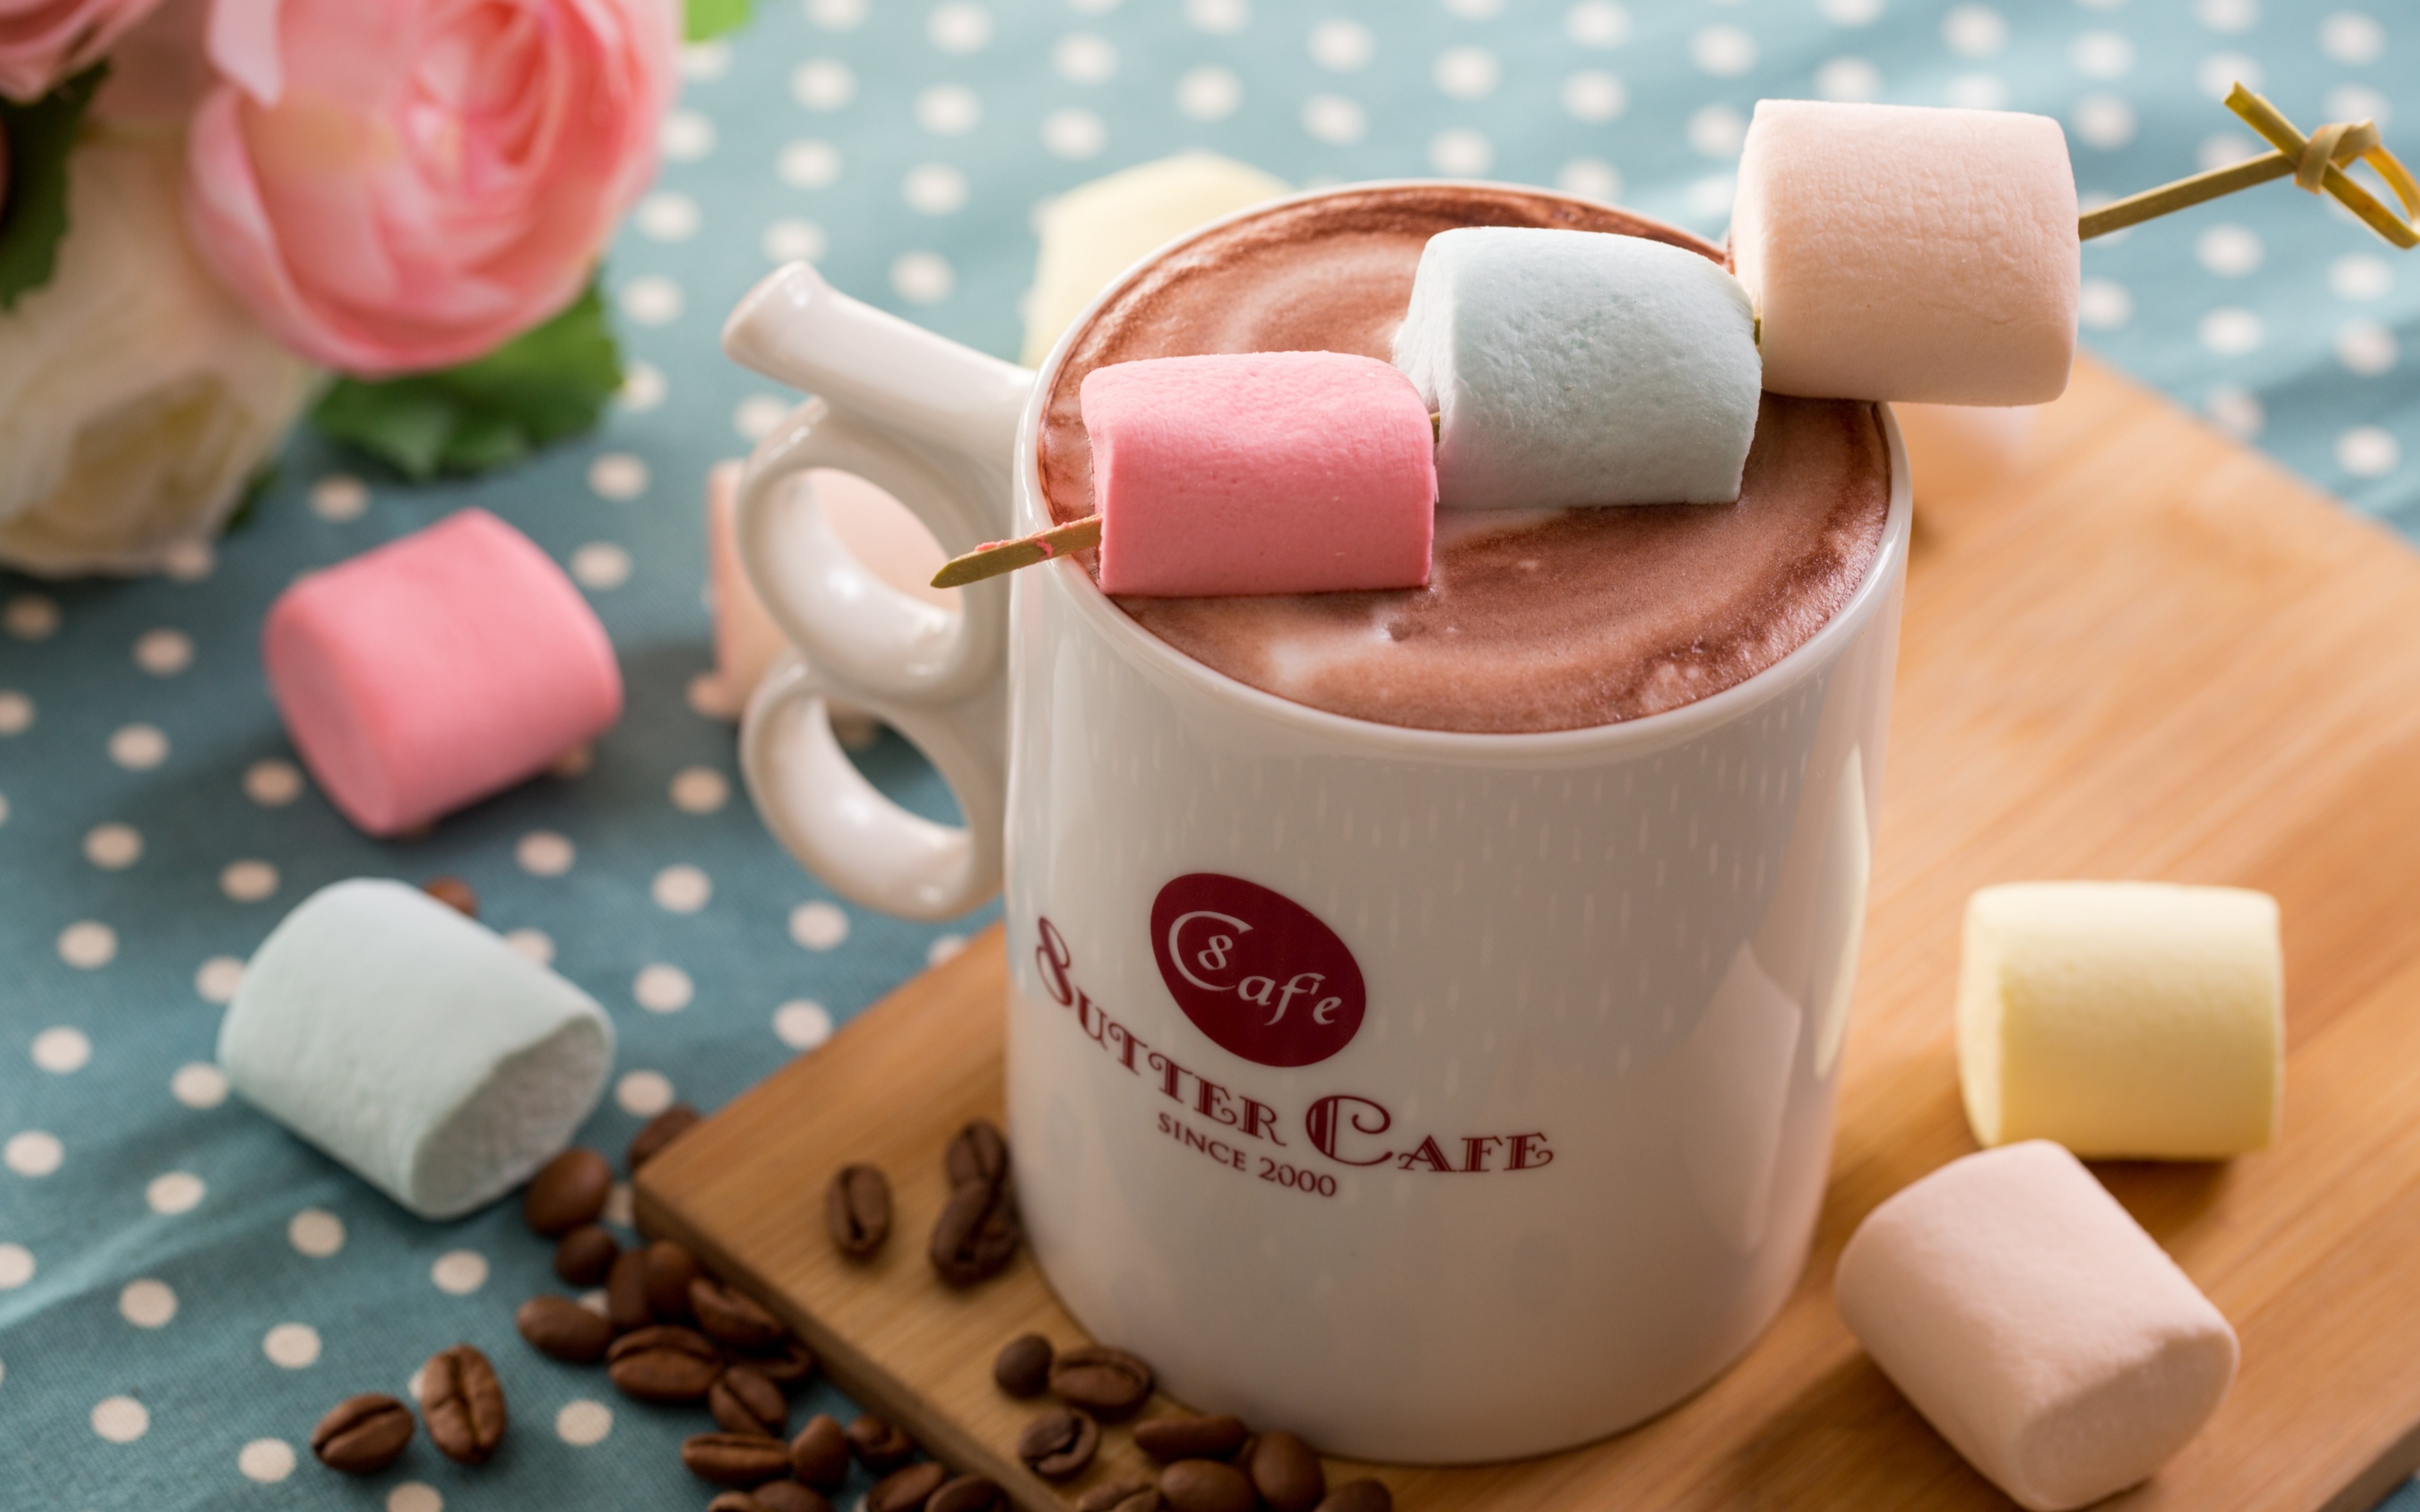 Hot chocolate and colorful marshmallows